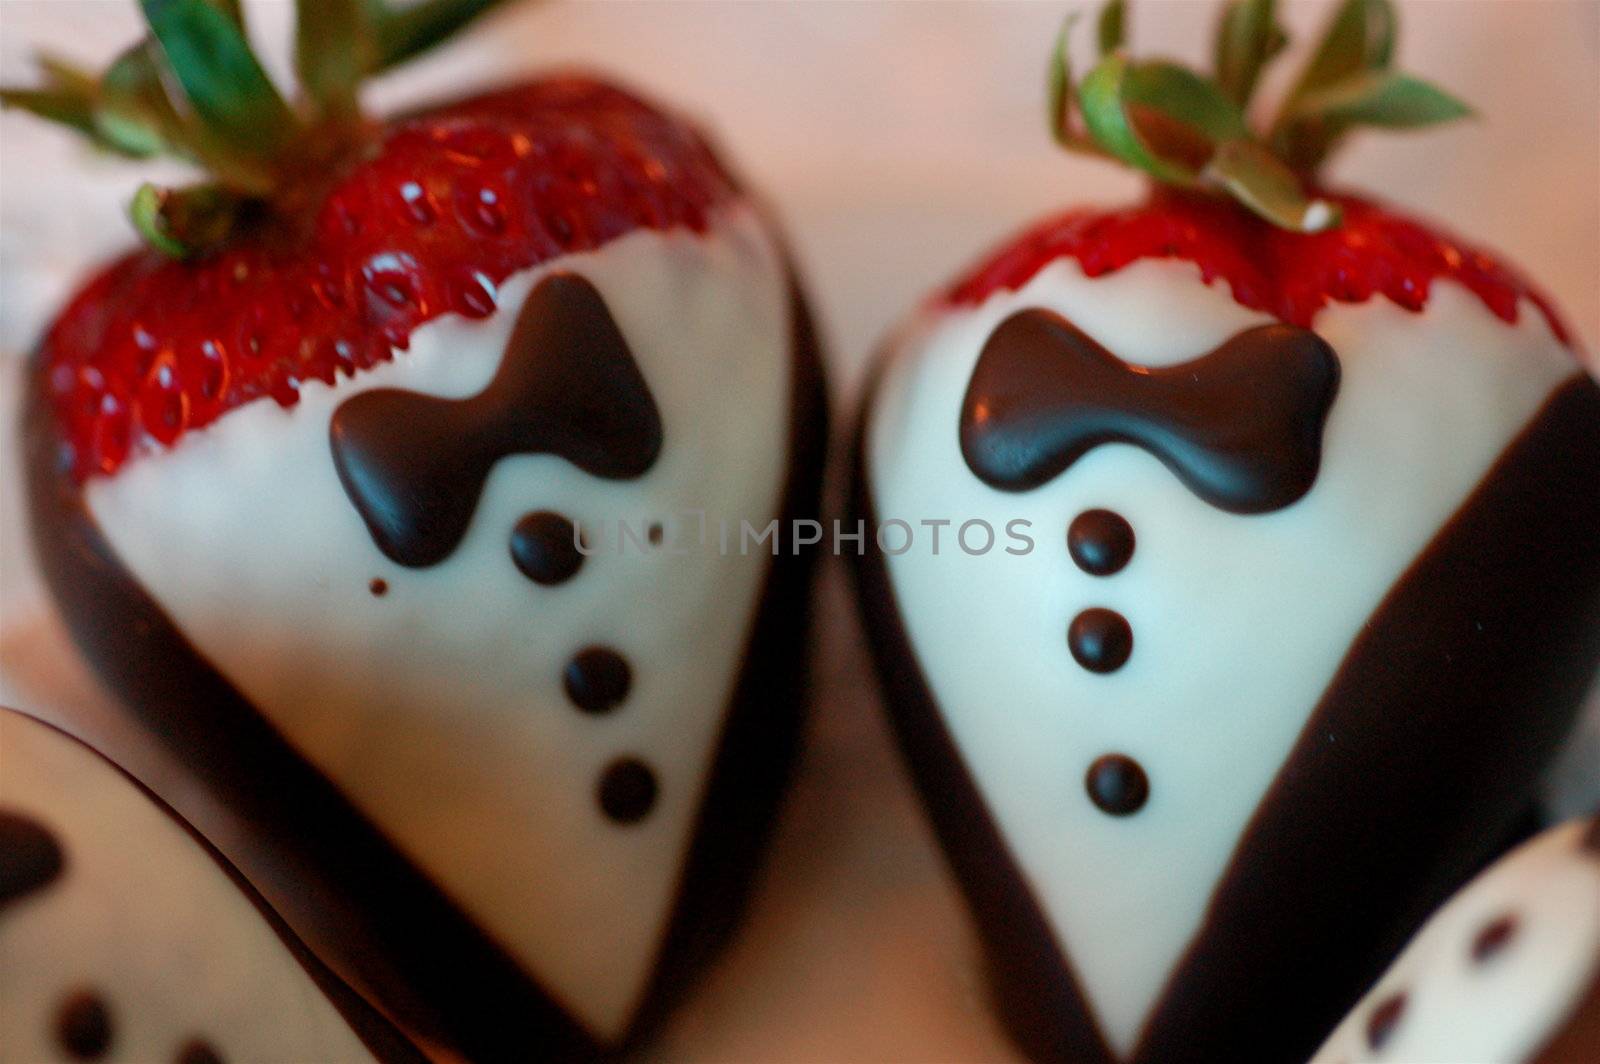 Strawberries in tuxedos